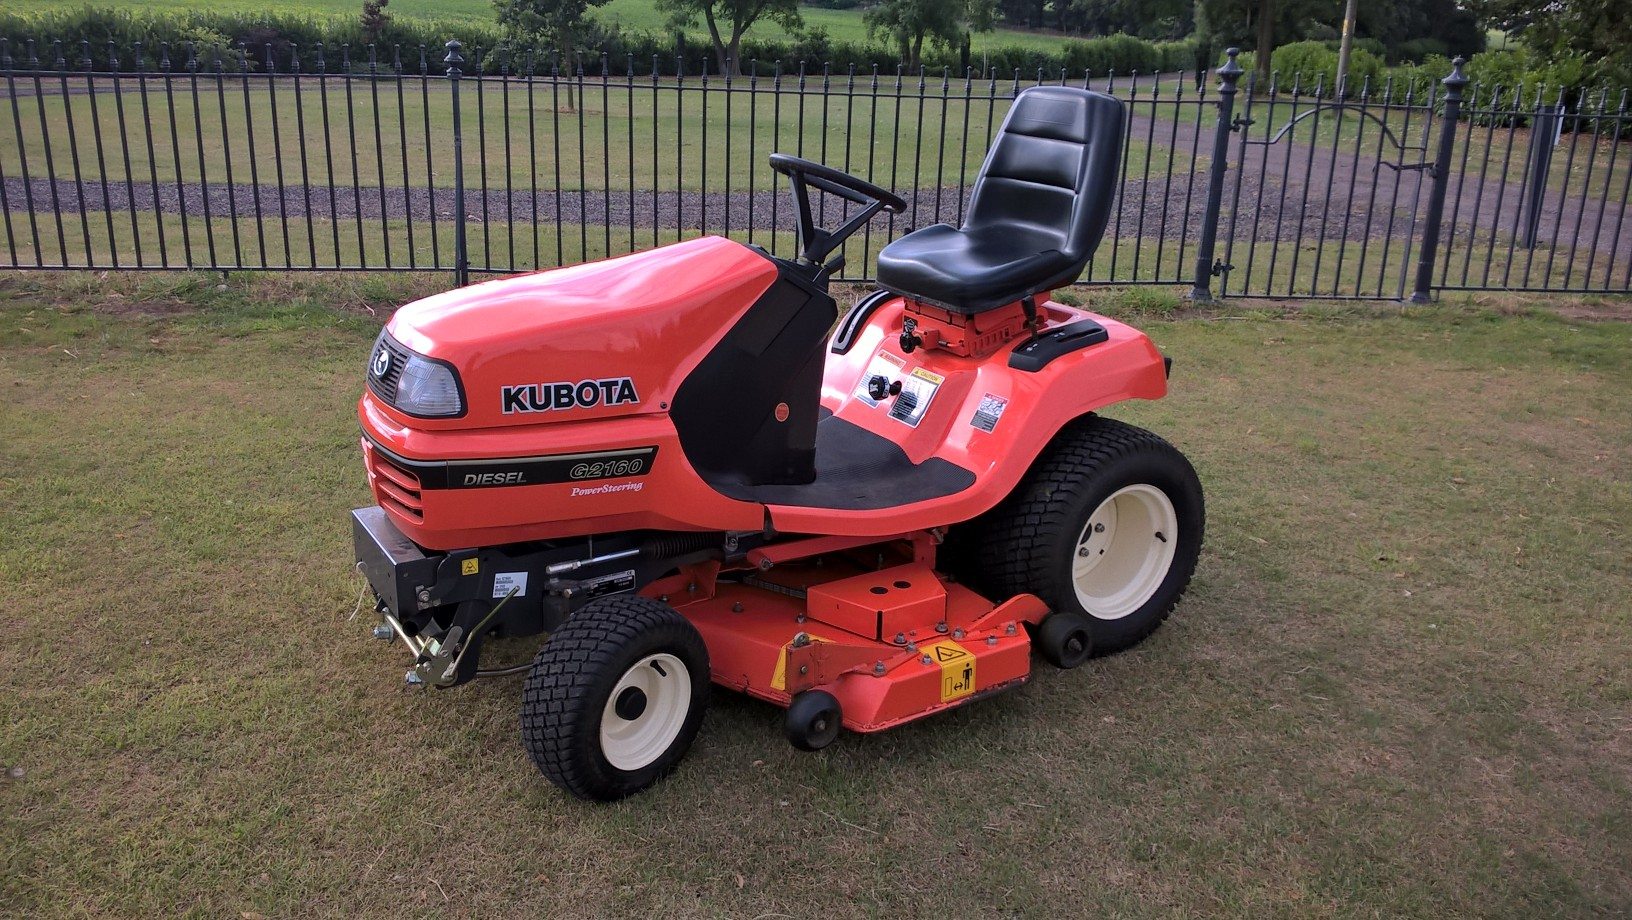 Kubota G2160 Ride on Mower SOLD - Small Tractors Small Tractors